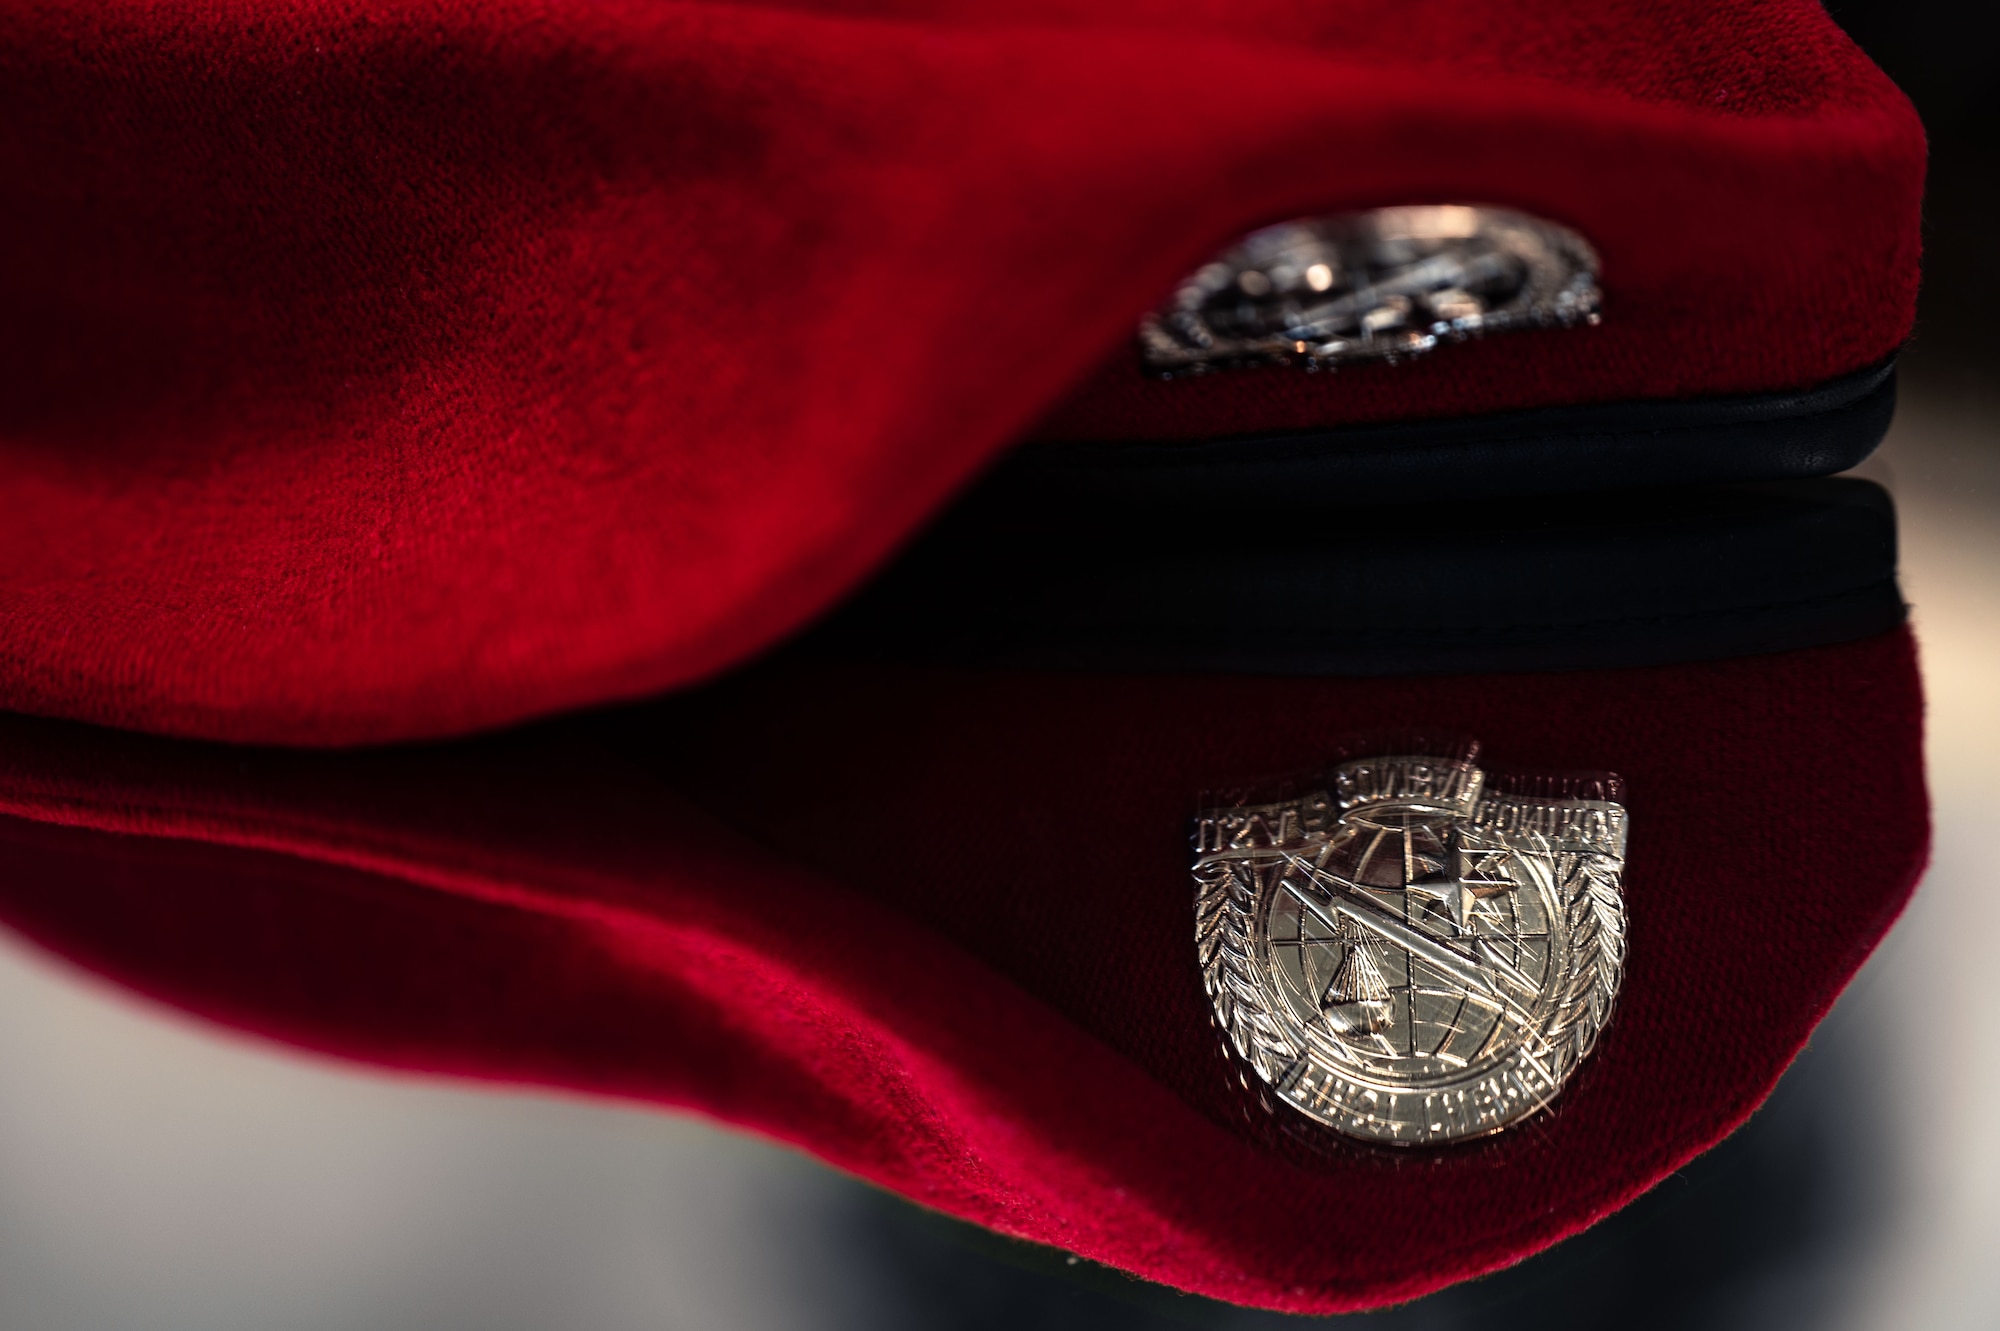 scarlet beret reflects in mirror with Combat Control pin brightly illuminated